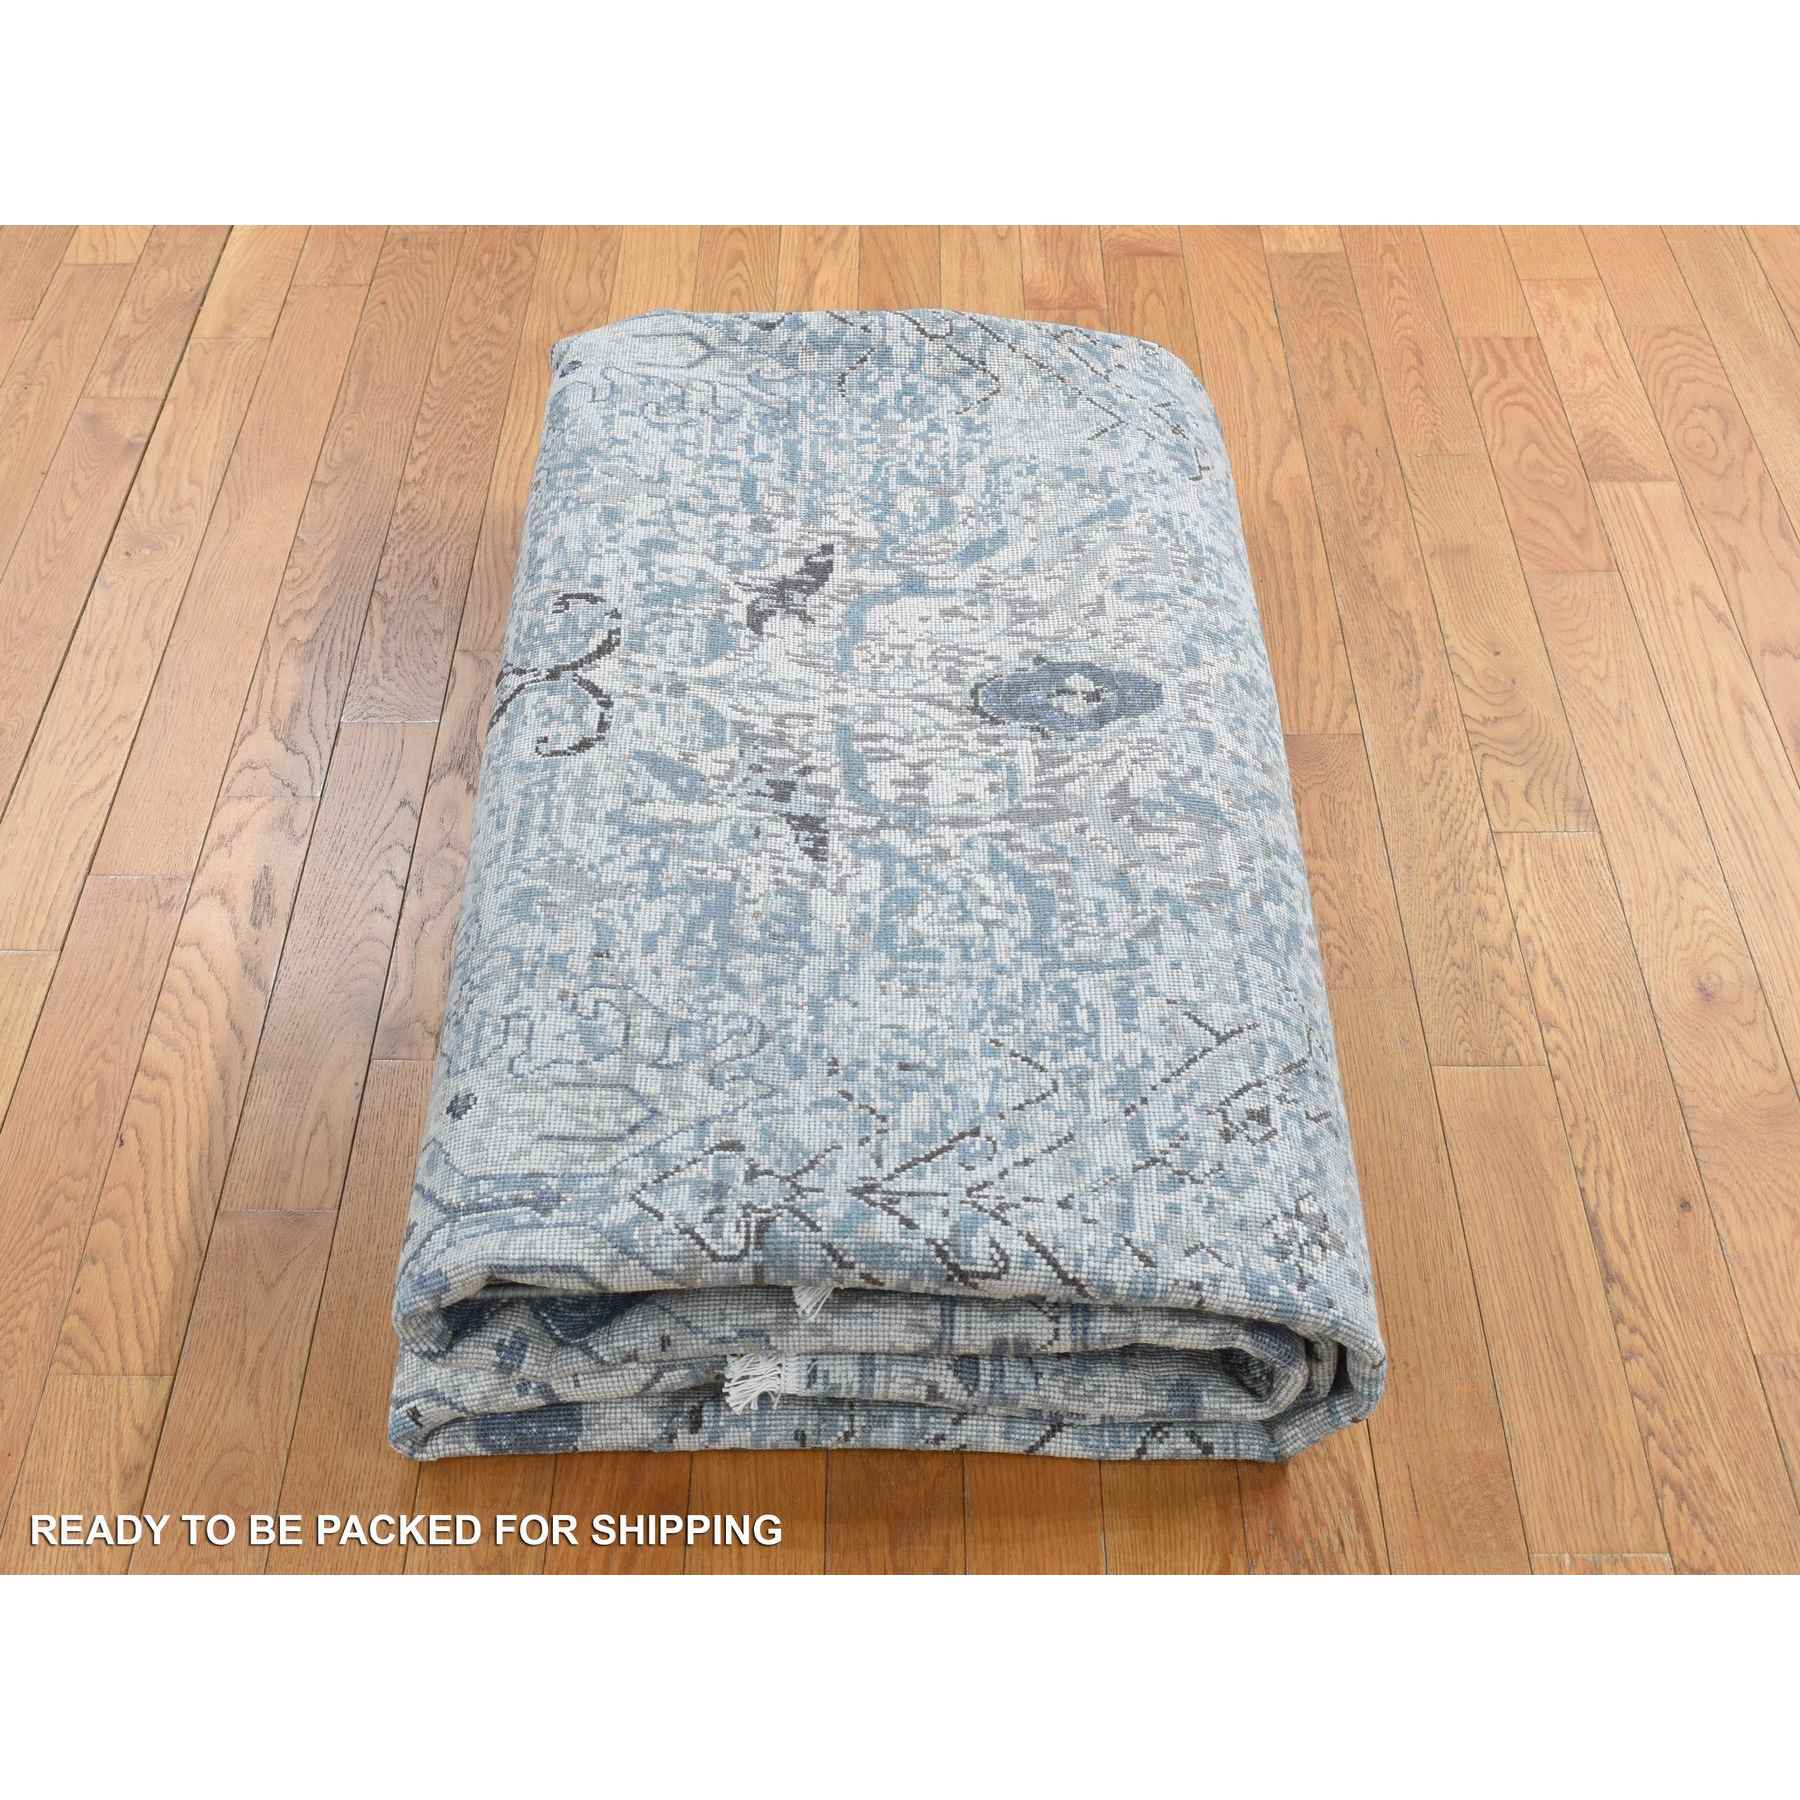 Transitional-Hand-Knotted-Rug-404460